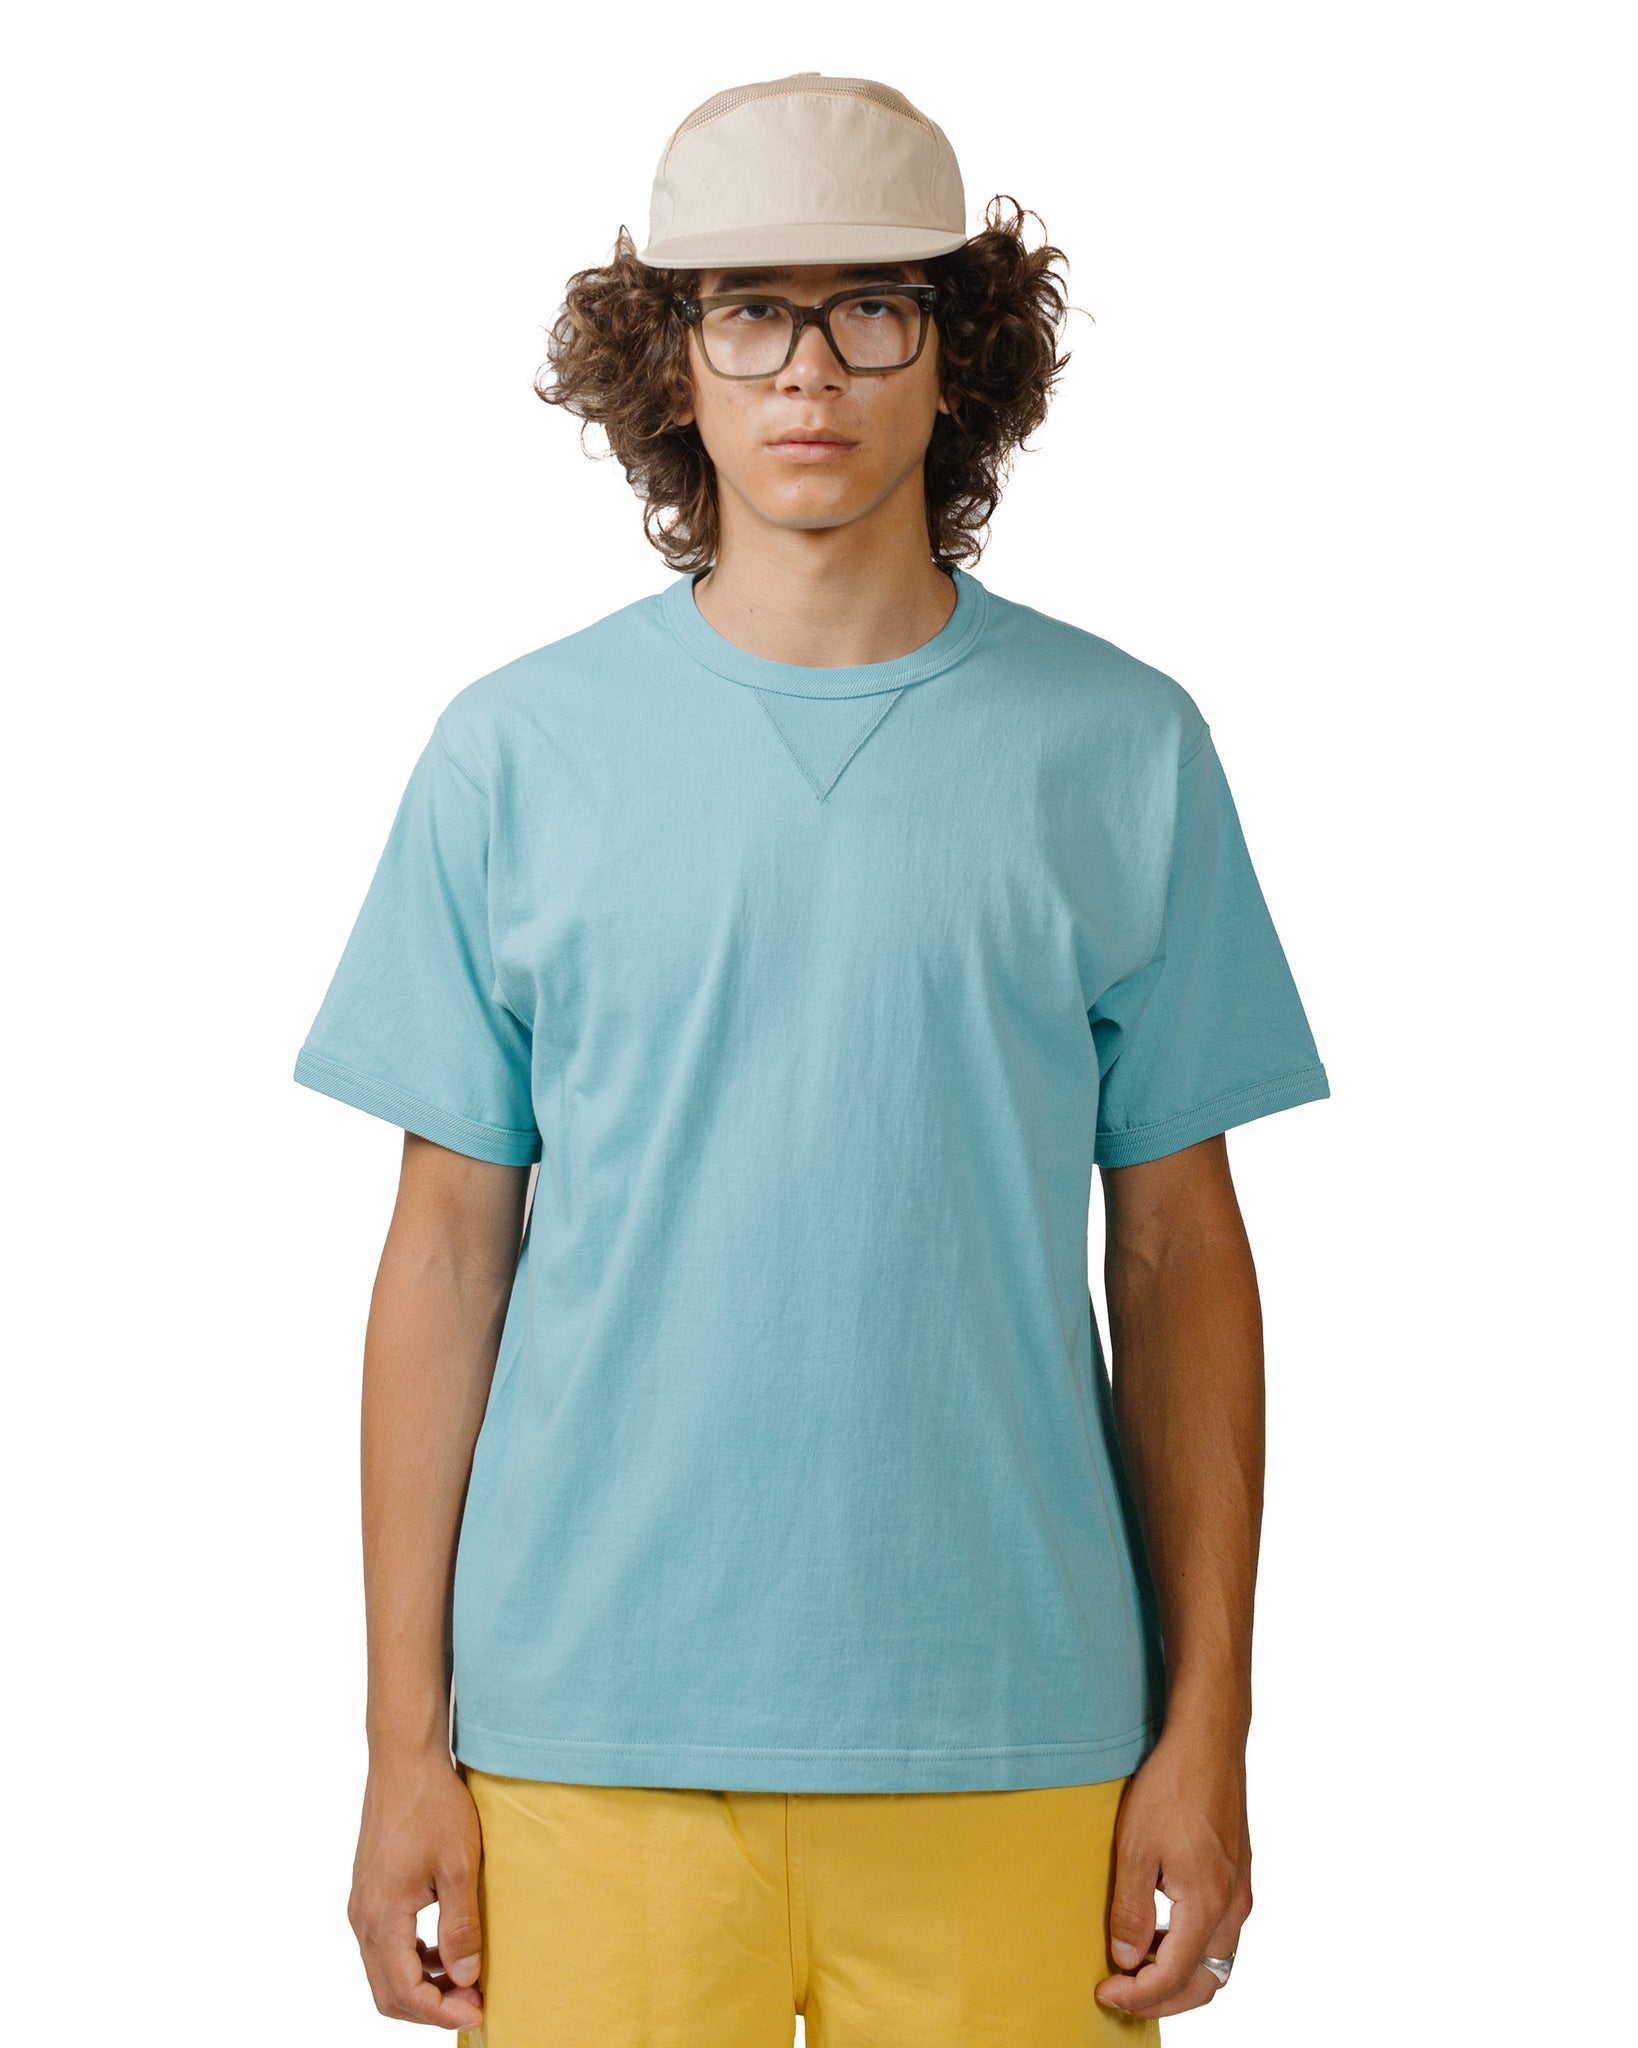 The Real McCoy's MC23020 Gusset Tee Teal model front